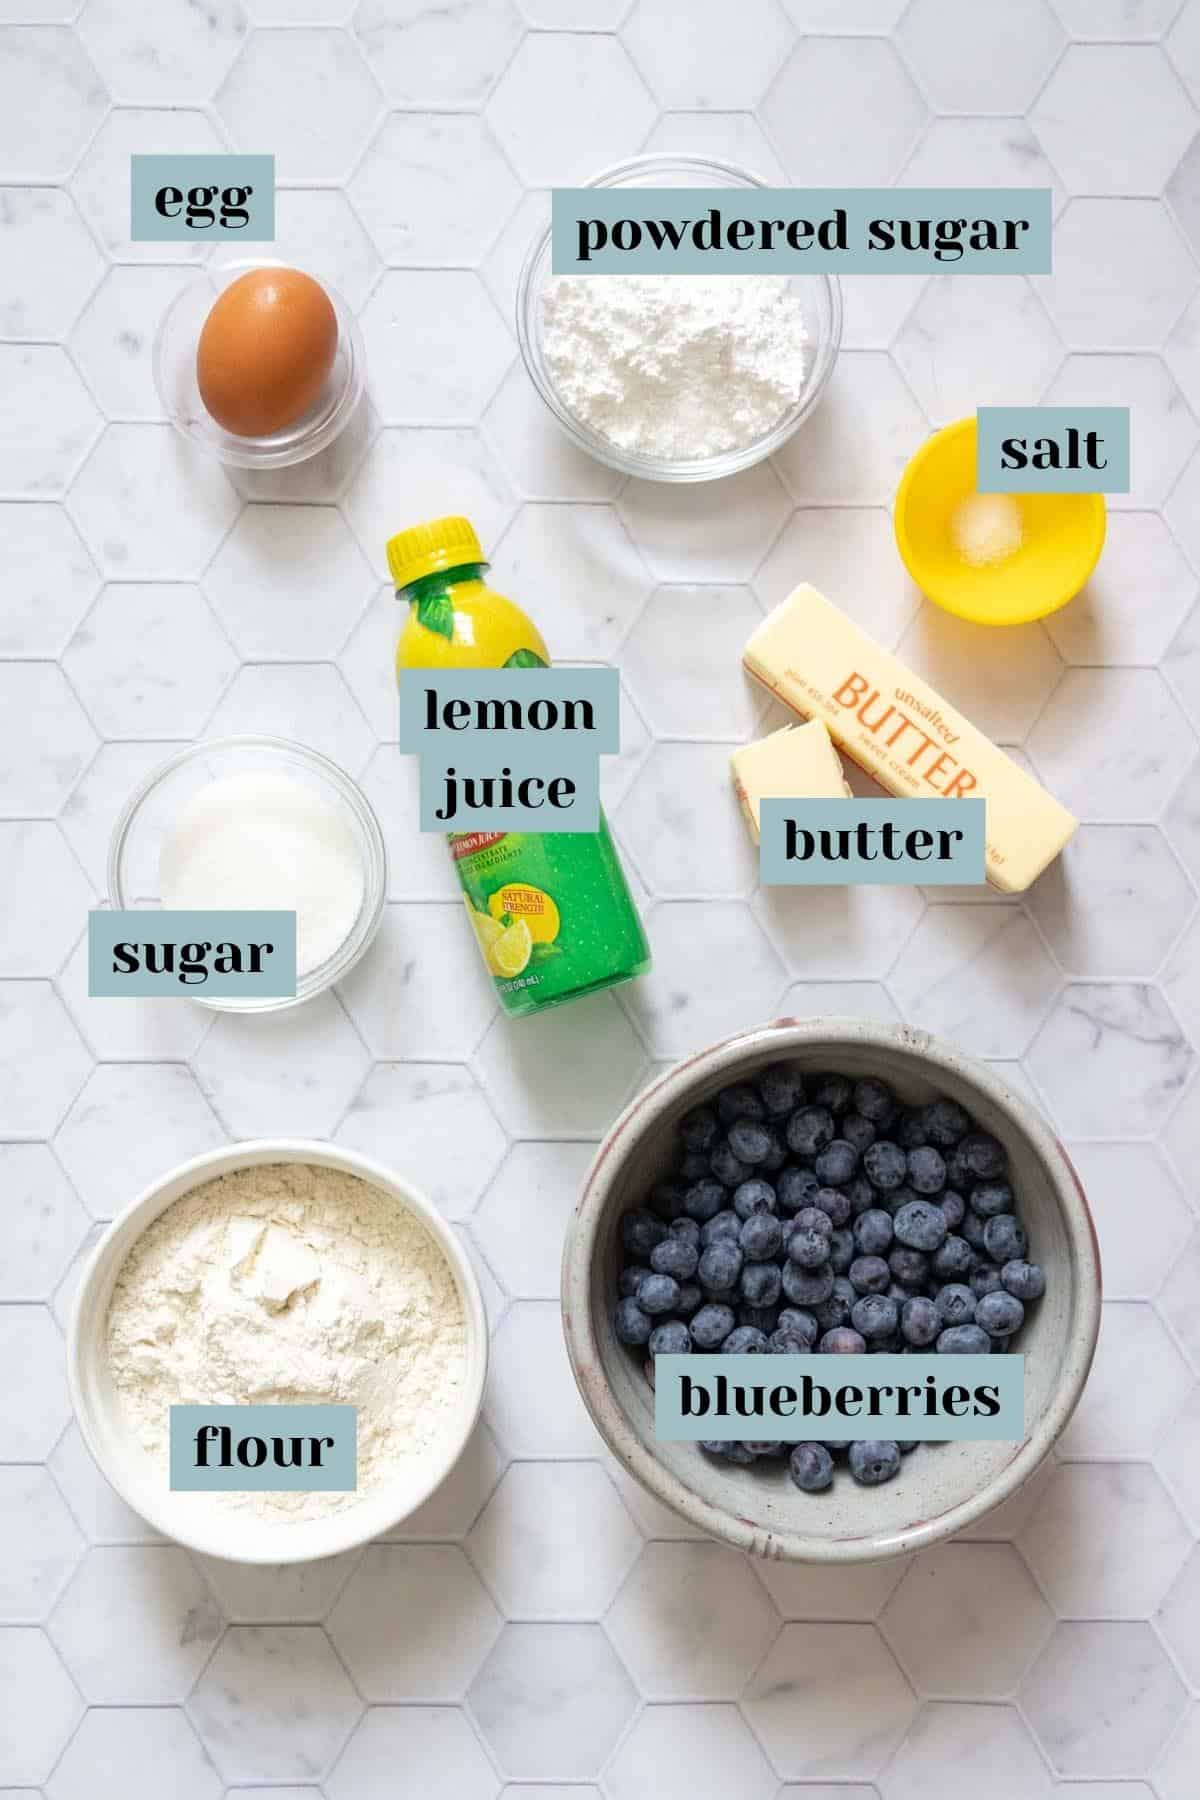 Ingredients for blueberry bars on a tile surface with labels.